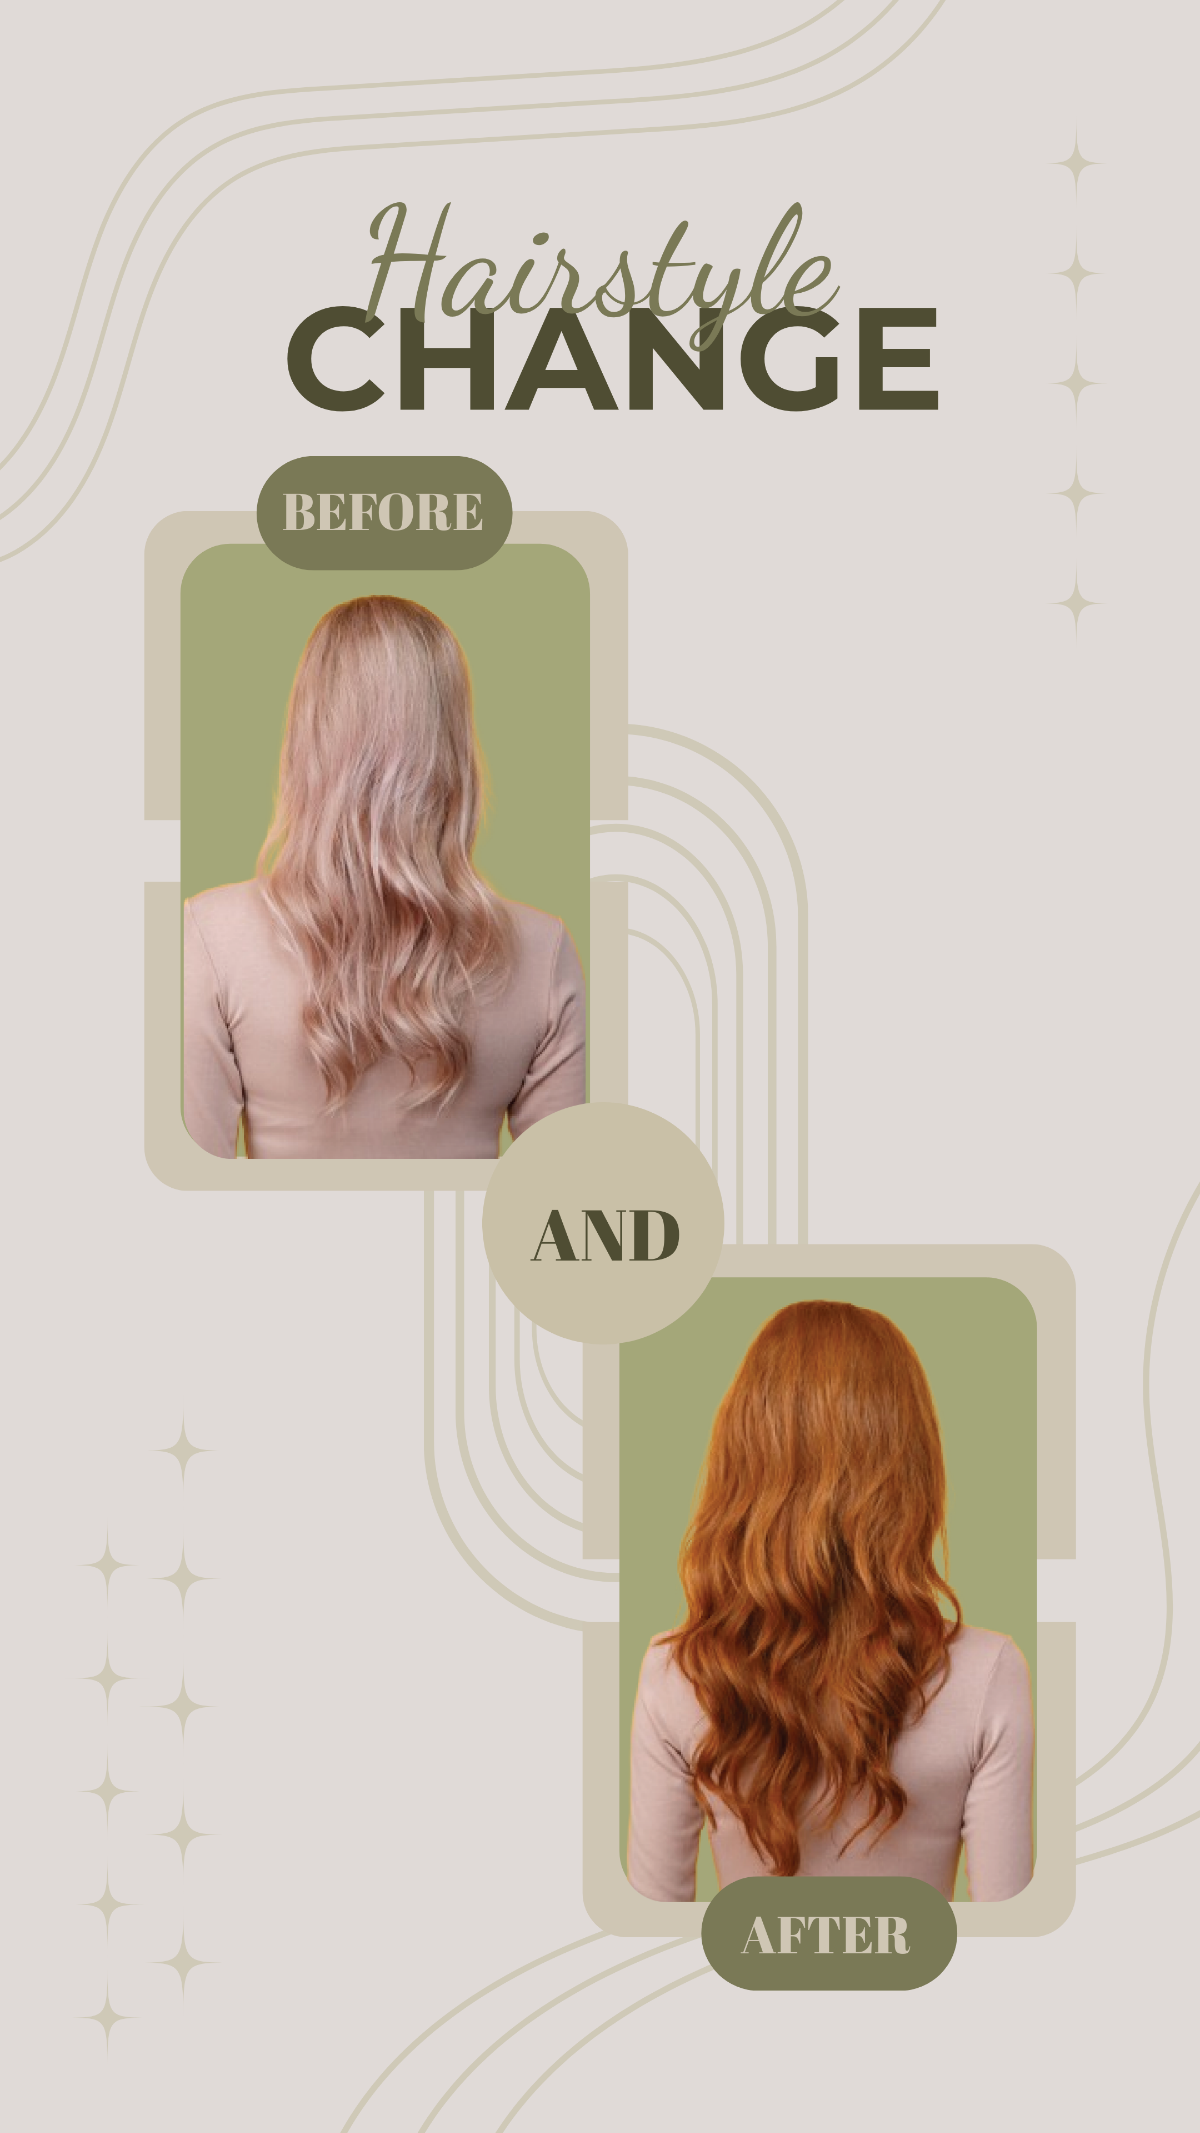 Hairstyle Before and After Photo Collage Instagram Post Template